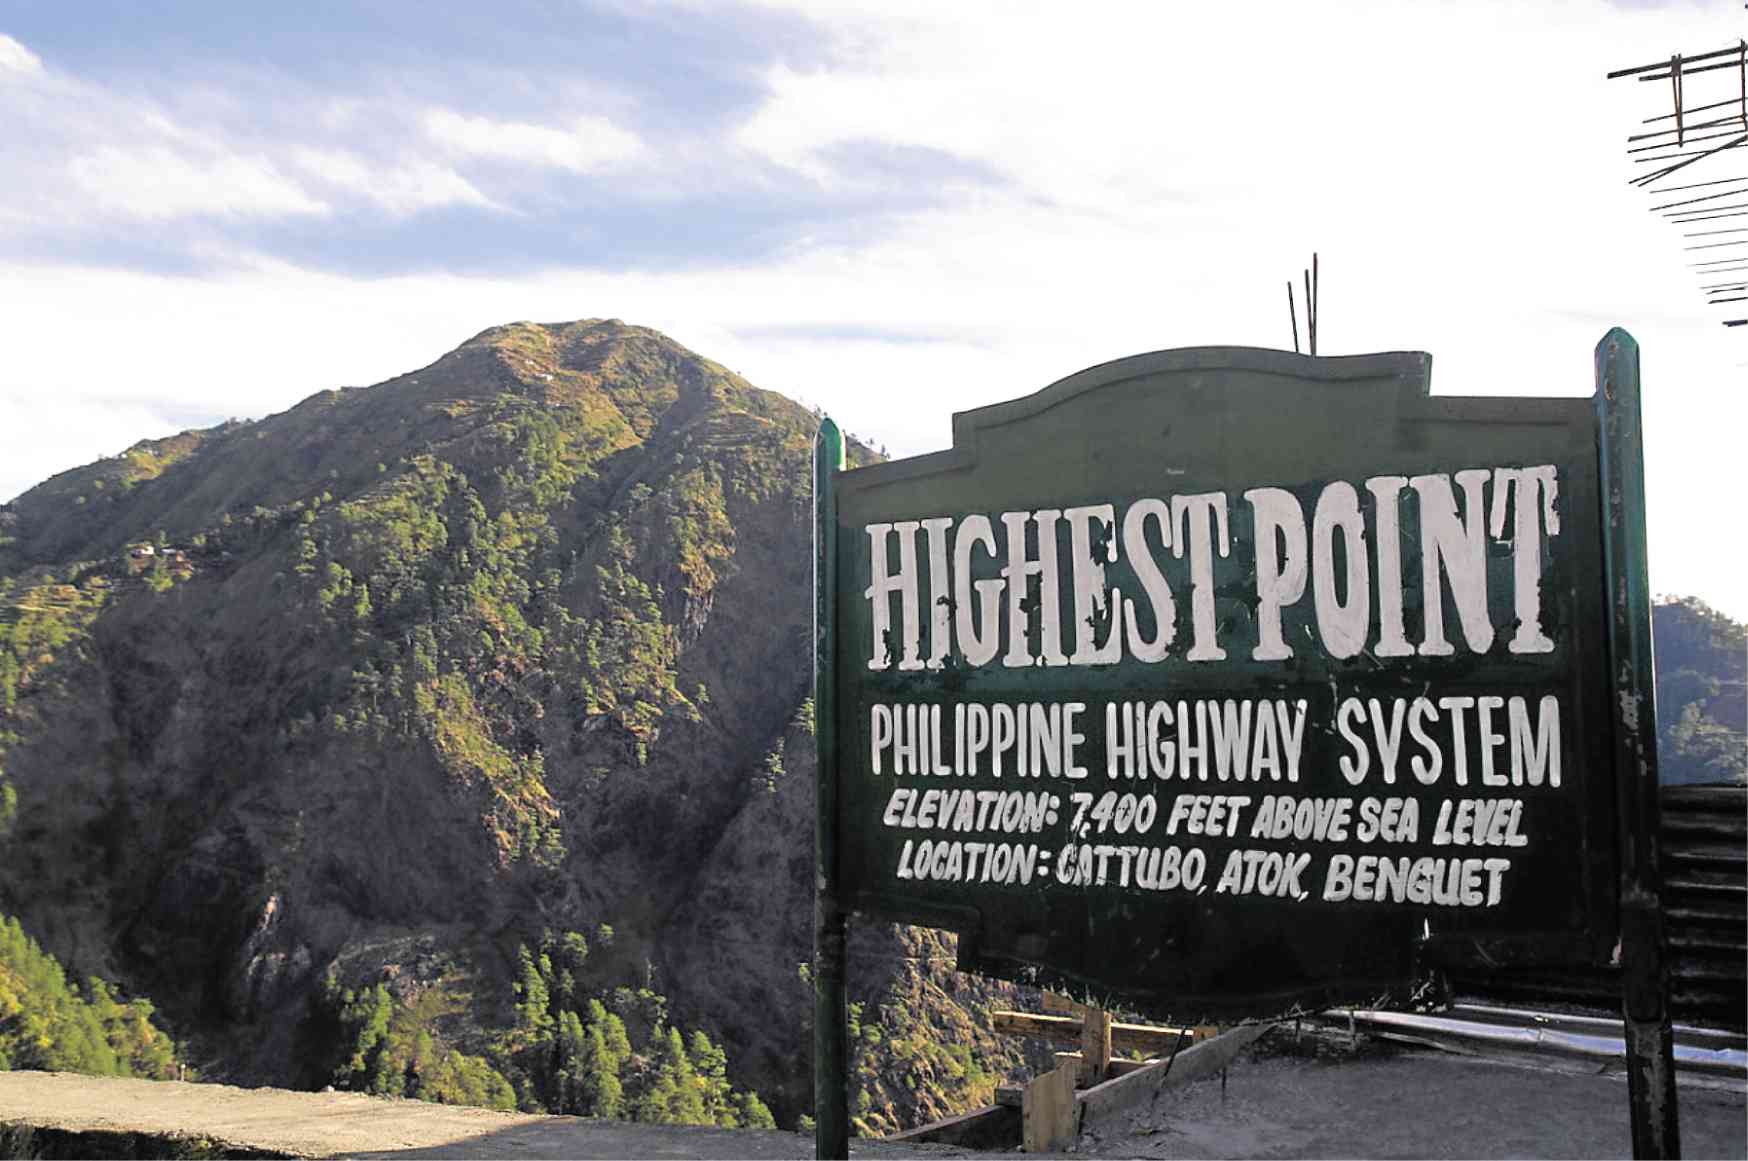 PH highway’s highest point now in Ifugao